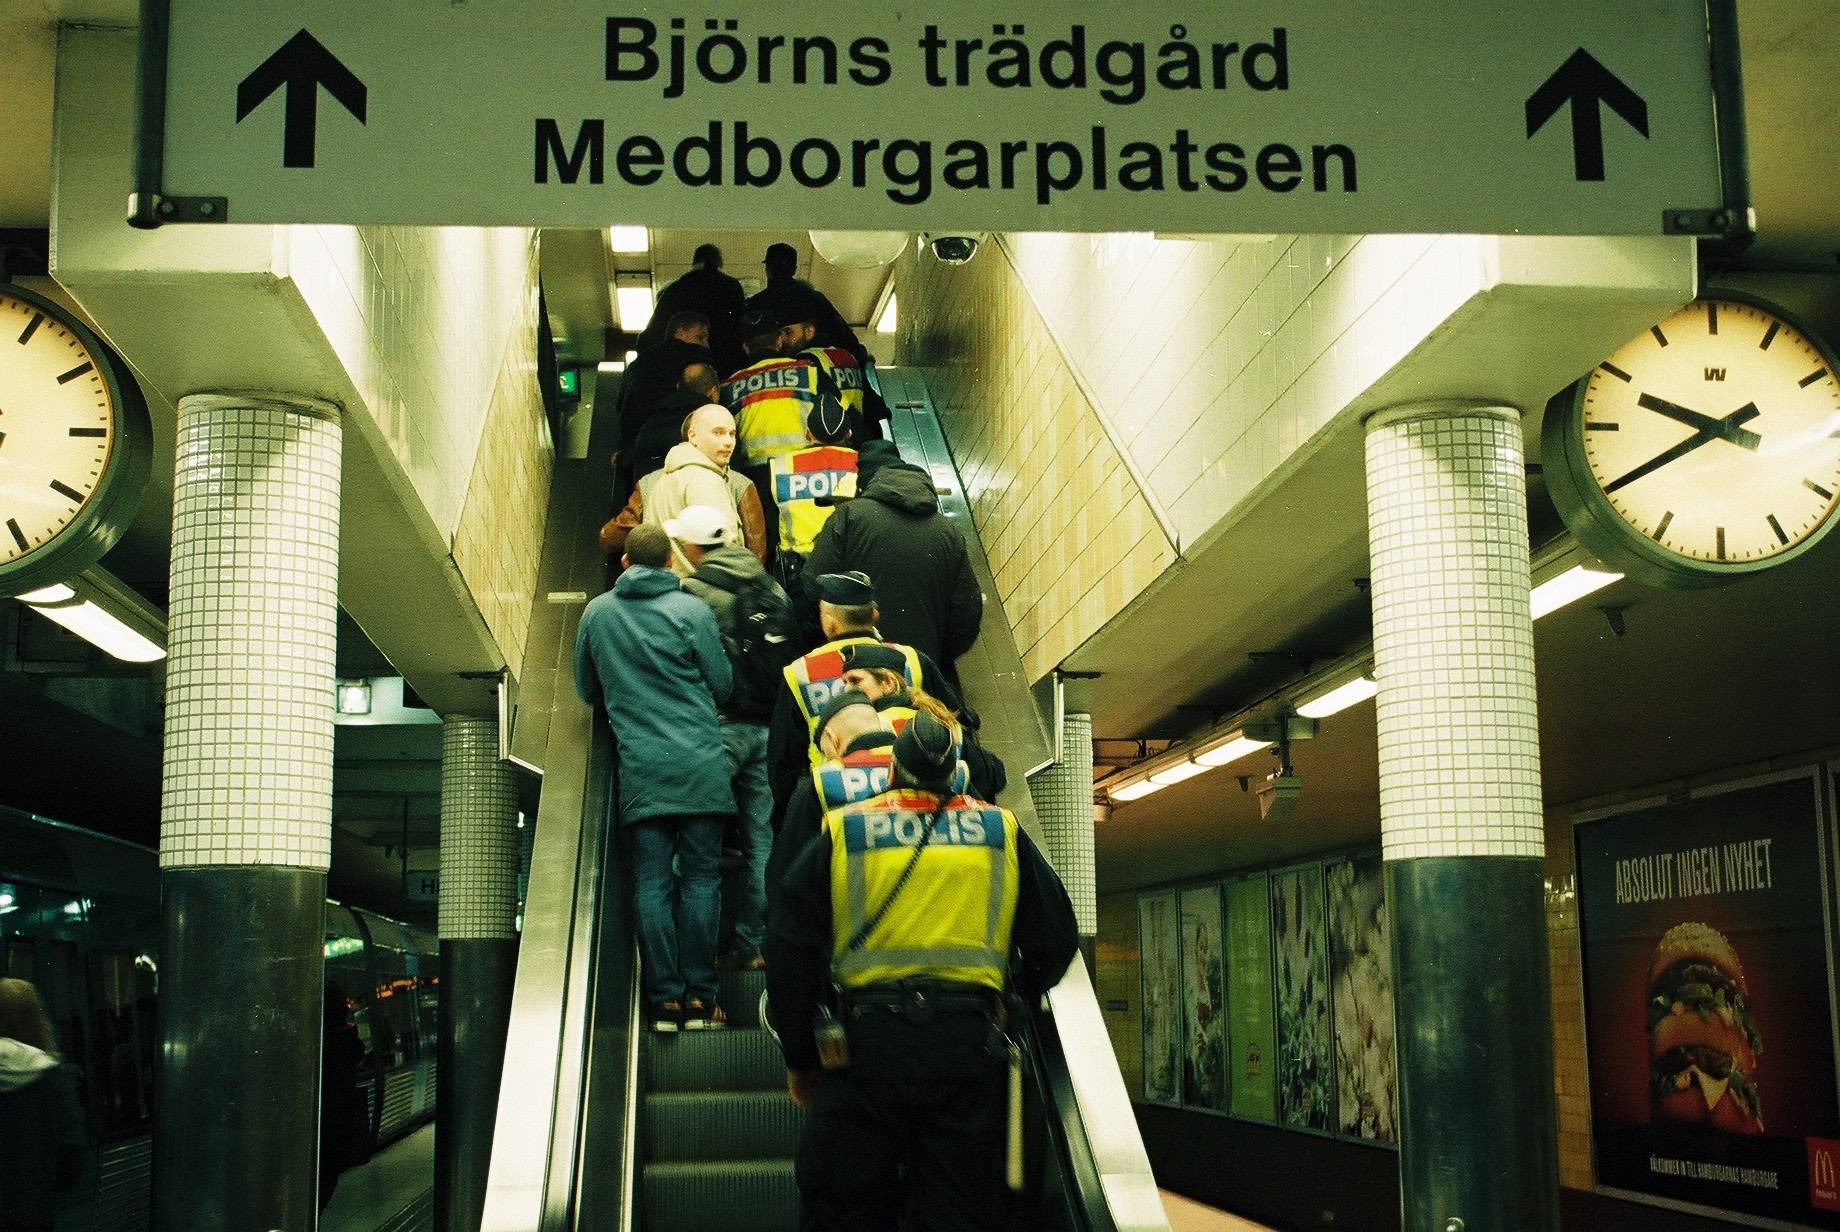 a group of people and police taking the escalator up with one man among the group looking into the camera